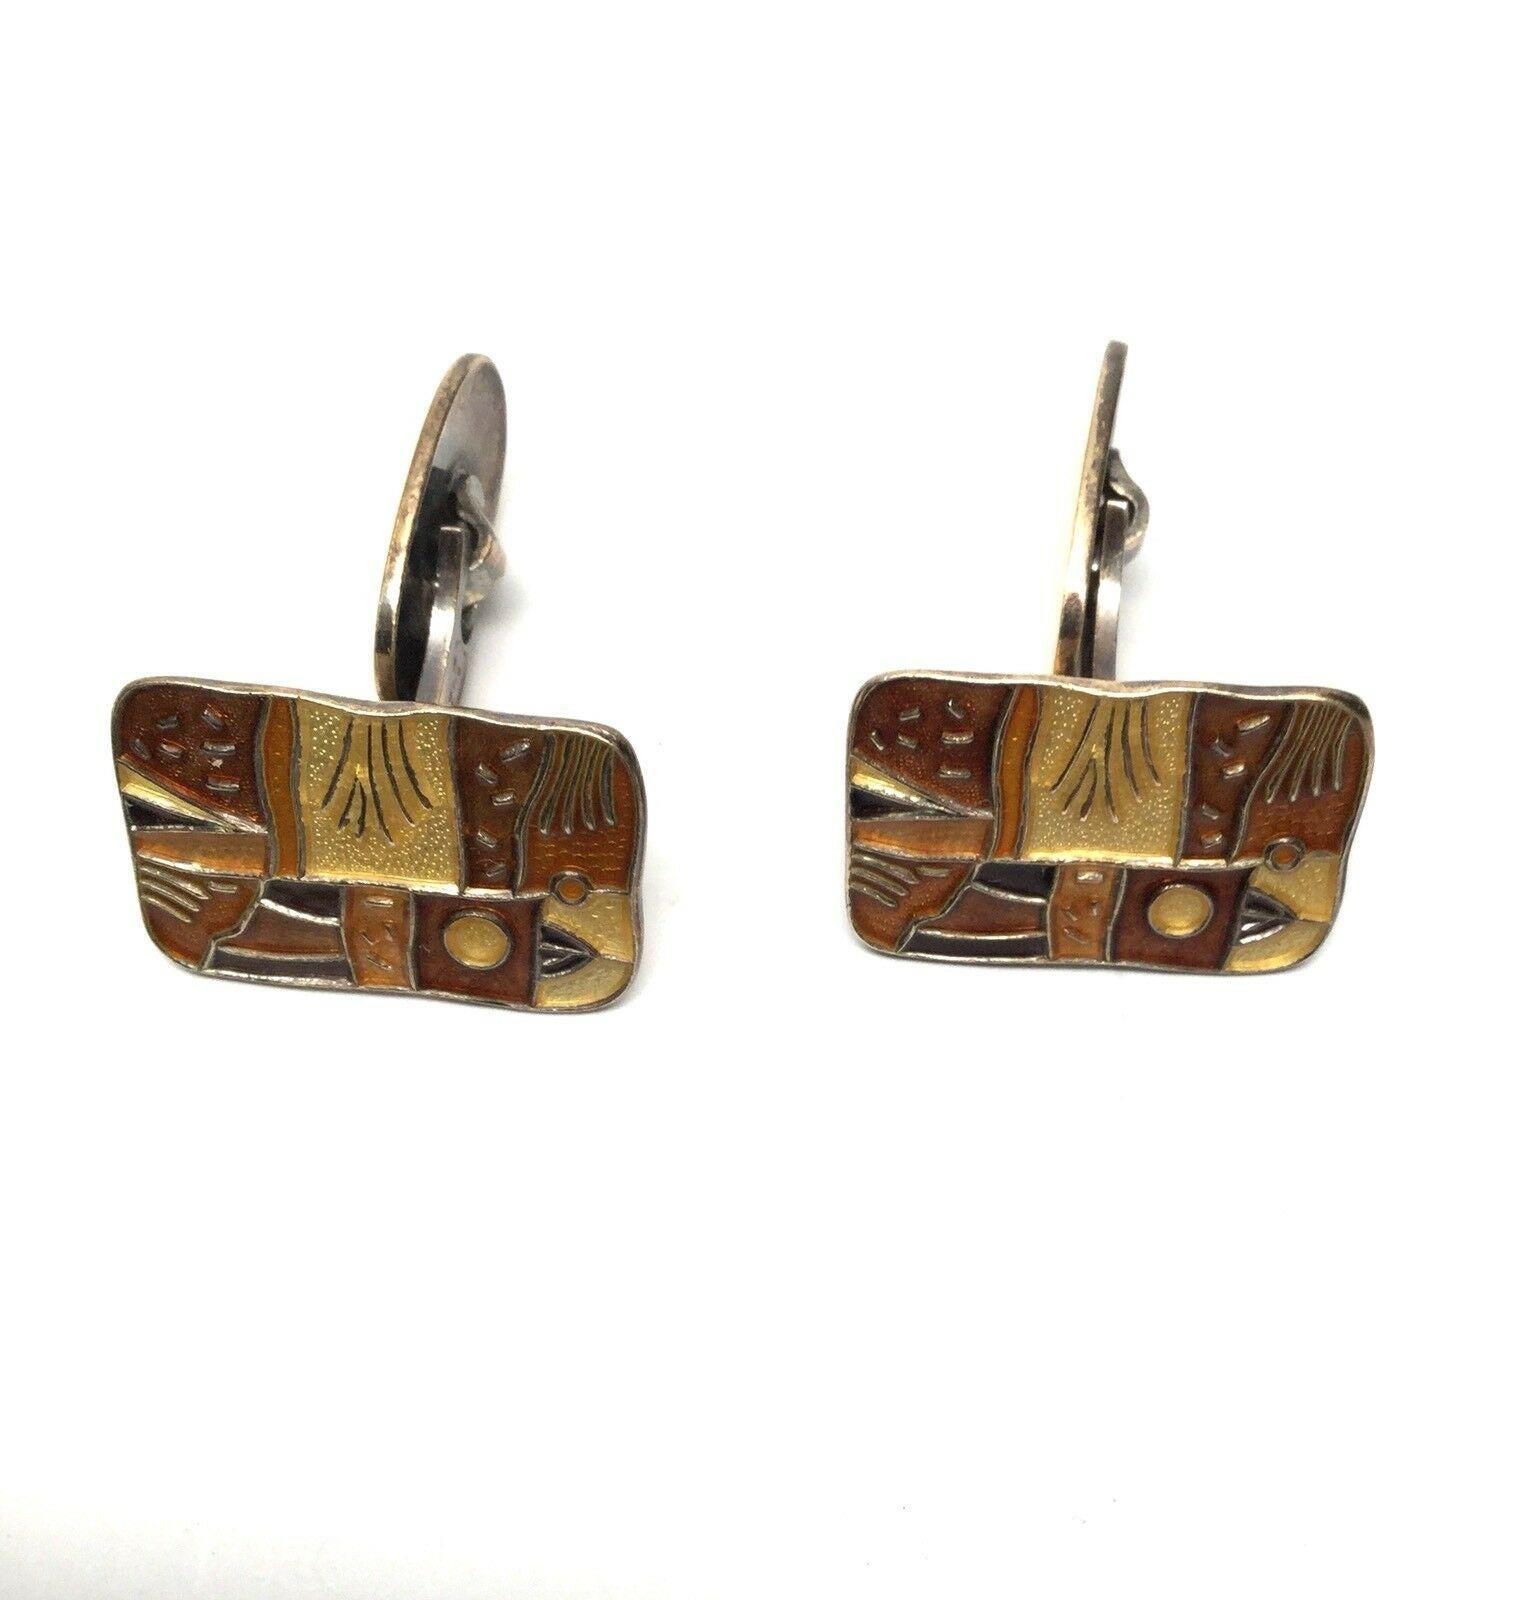 Vintage David Andersen Norway Sterling Silver Autumn Cufflinks with Enamel

These cufflink faces are rectangular with gold washed sterling silver outlining the edges. The enamel is in rich and powerful shades of brown and cream designed by David